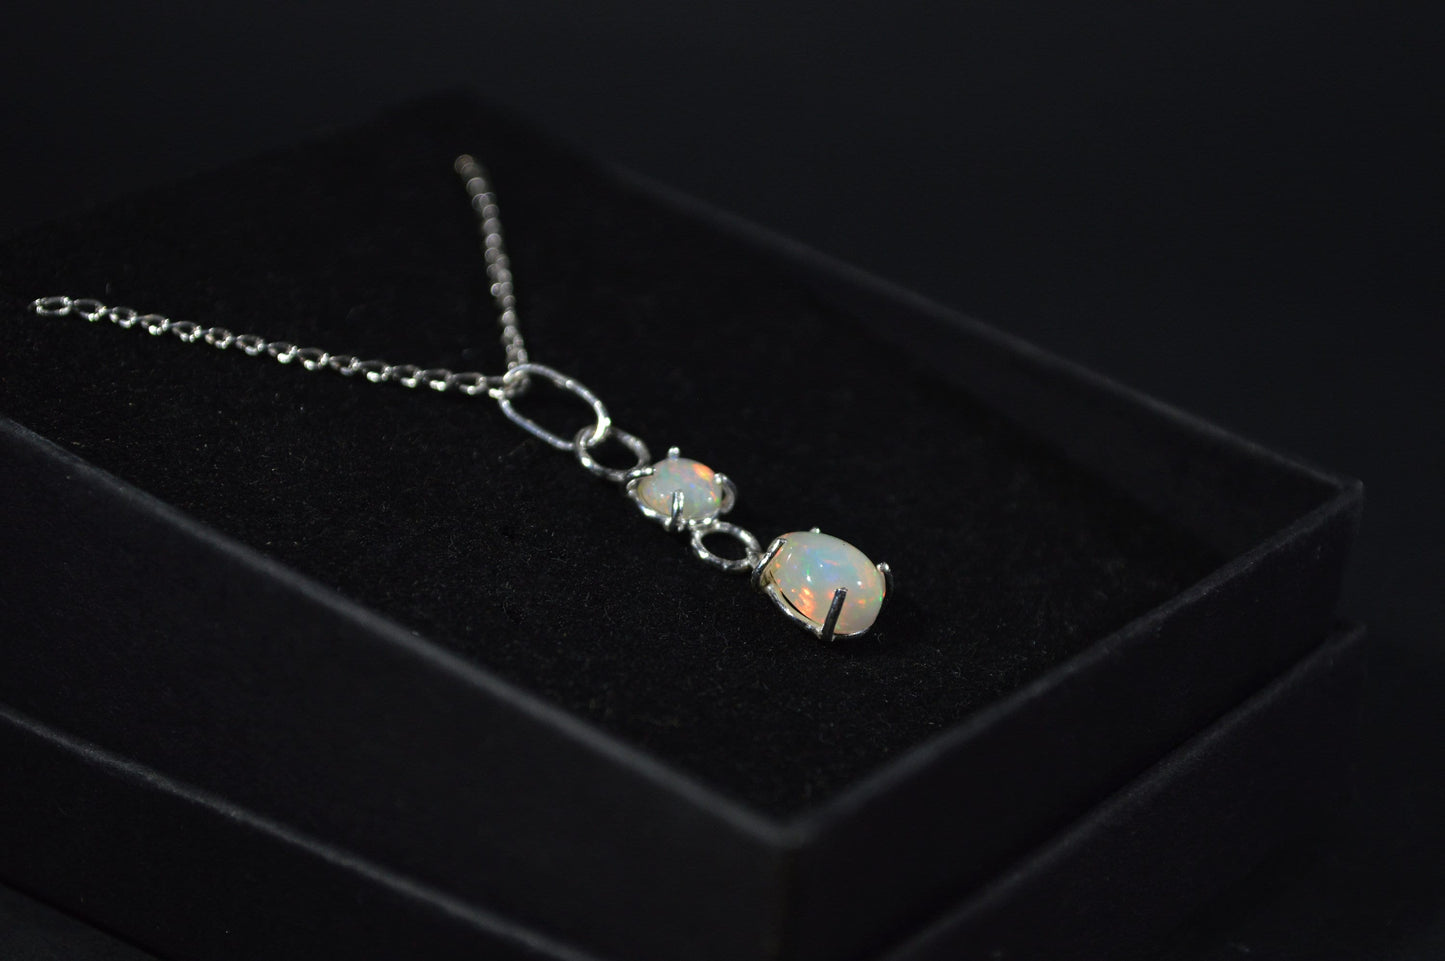 white opal necklace